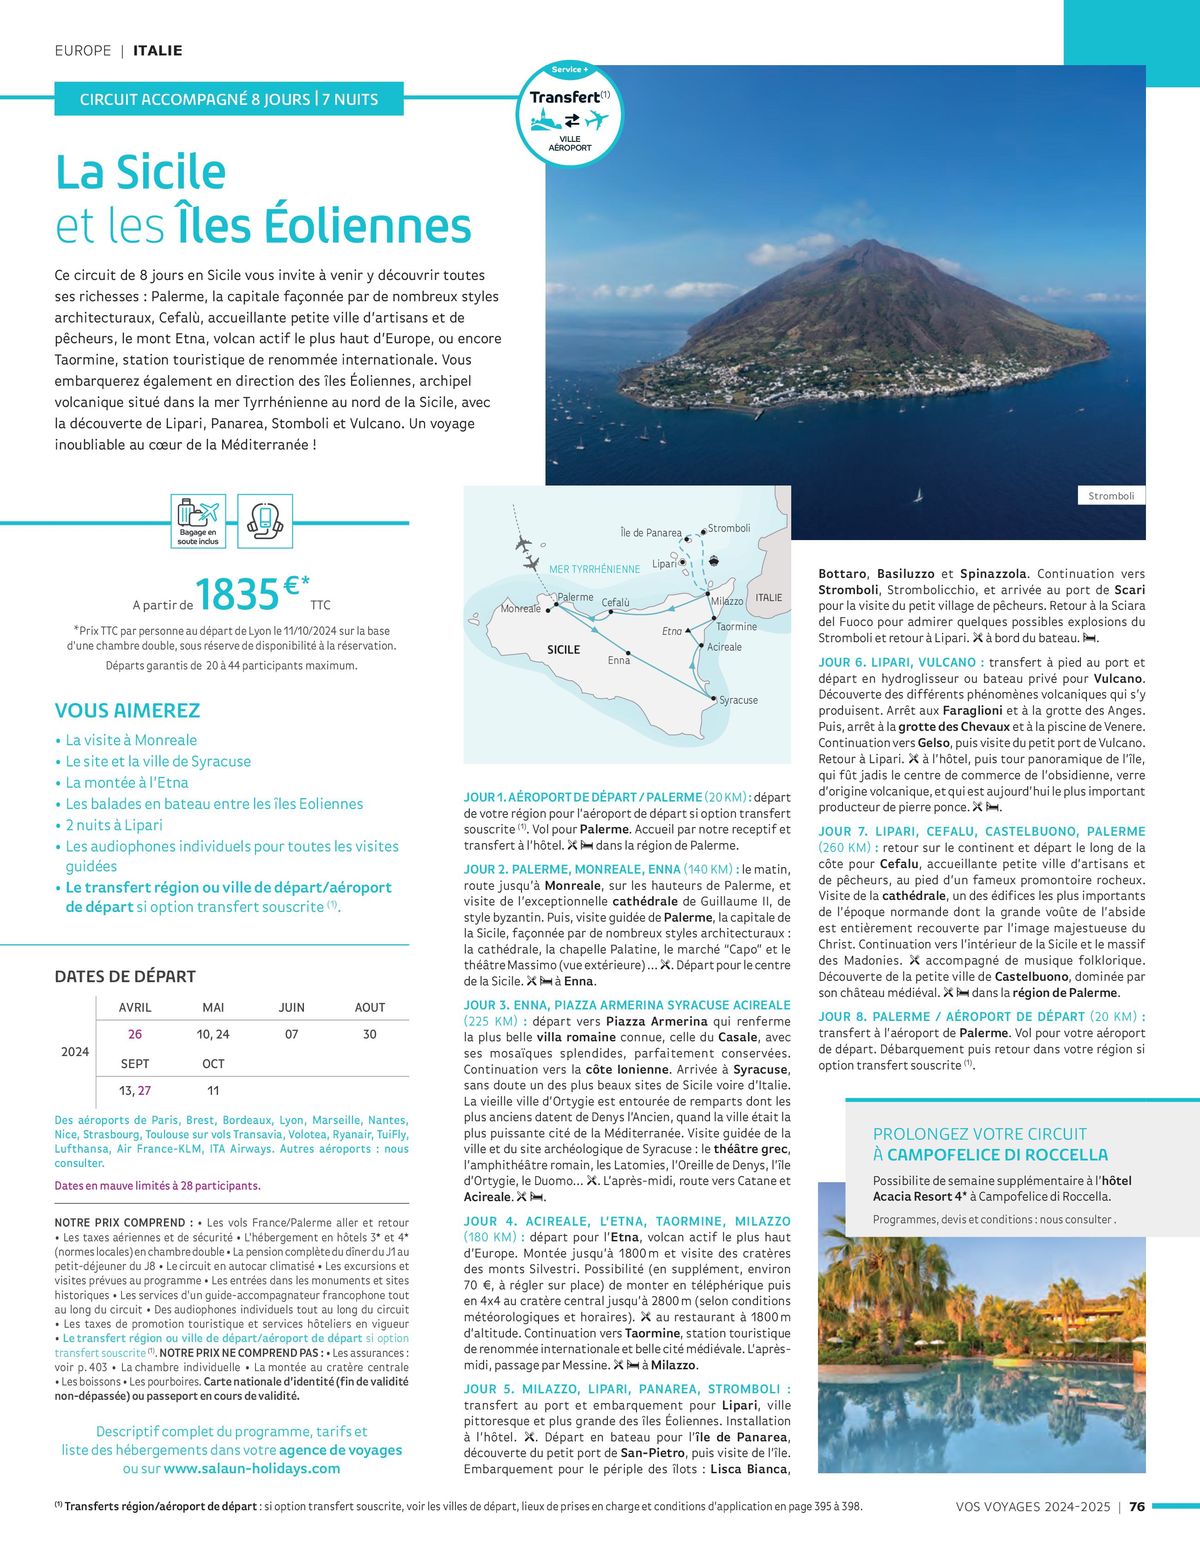 Catalogue Vos voyages 2024-2025, page 00076